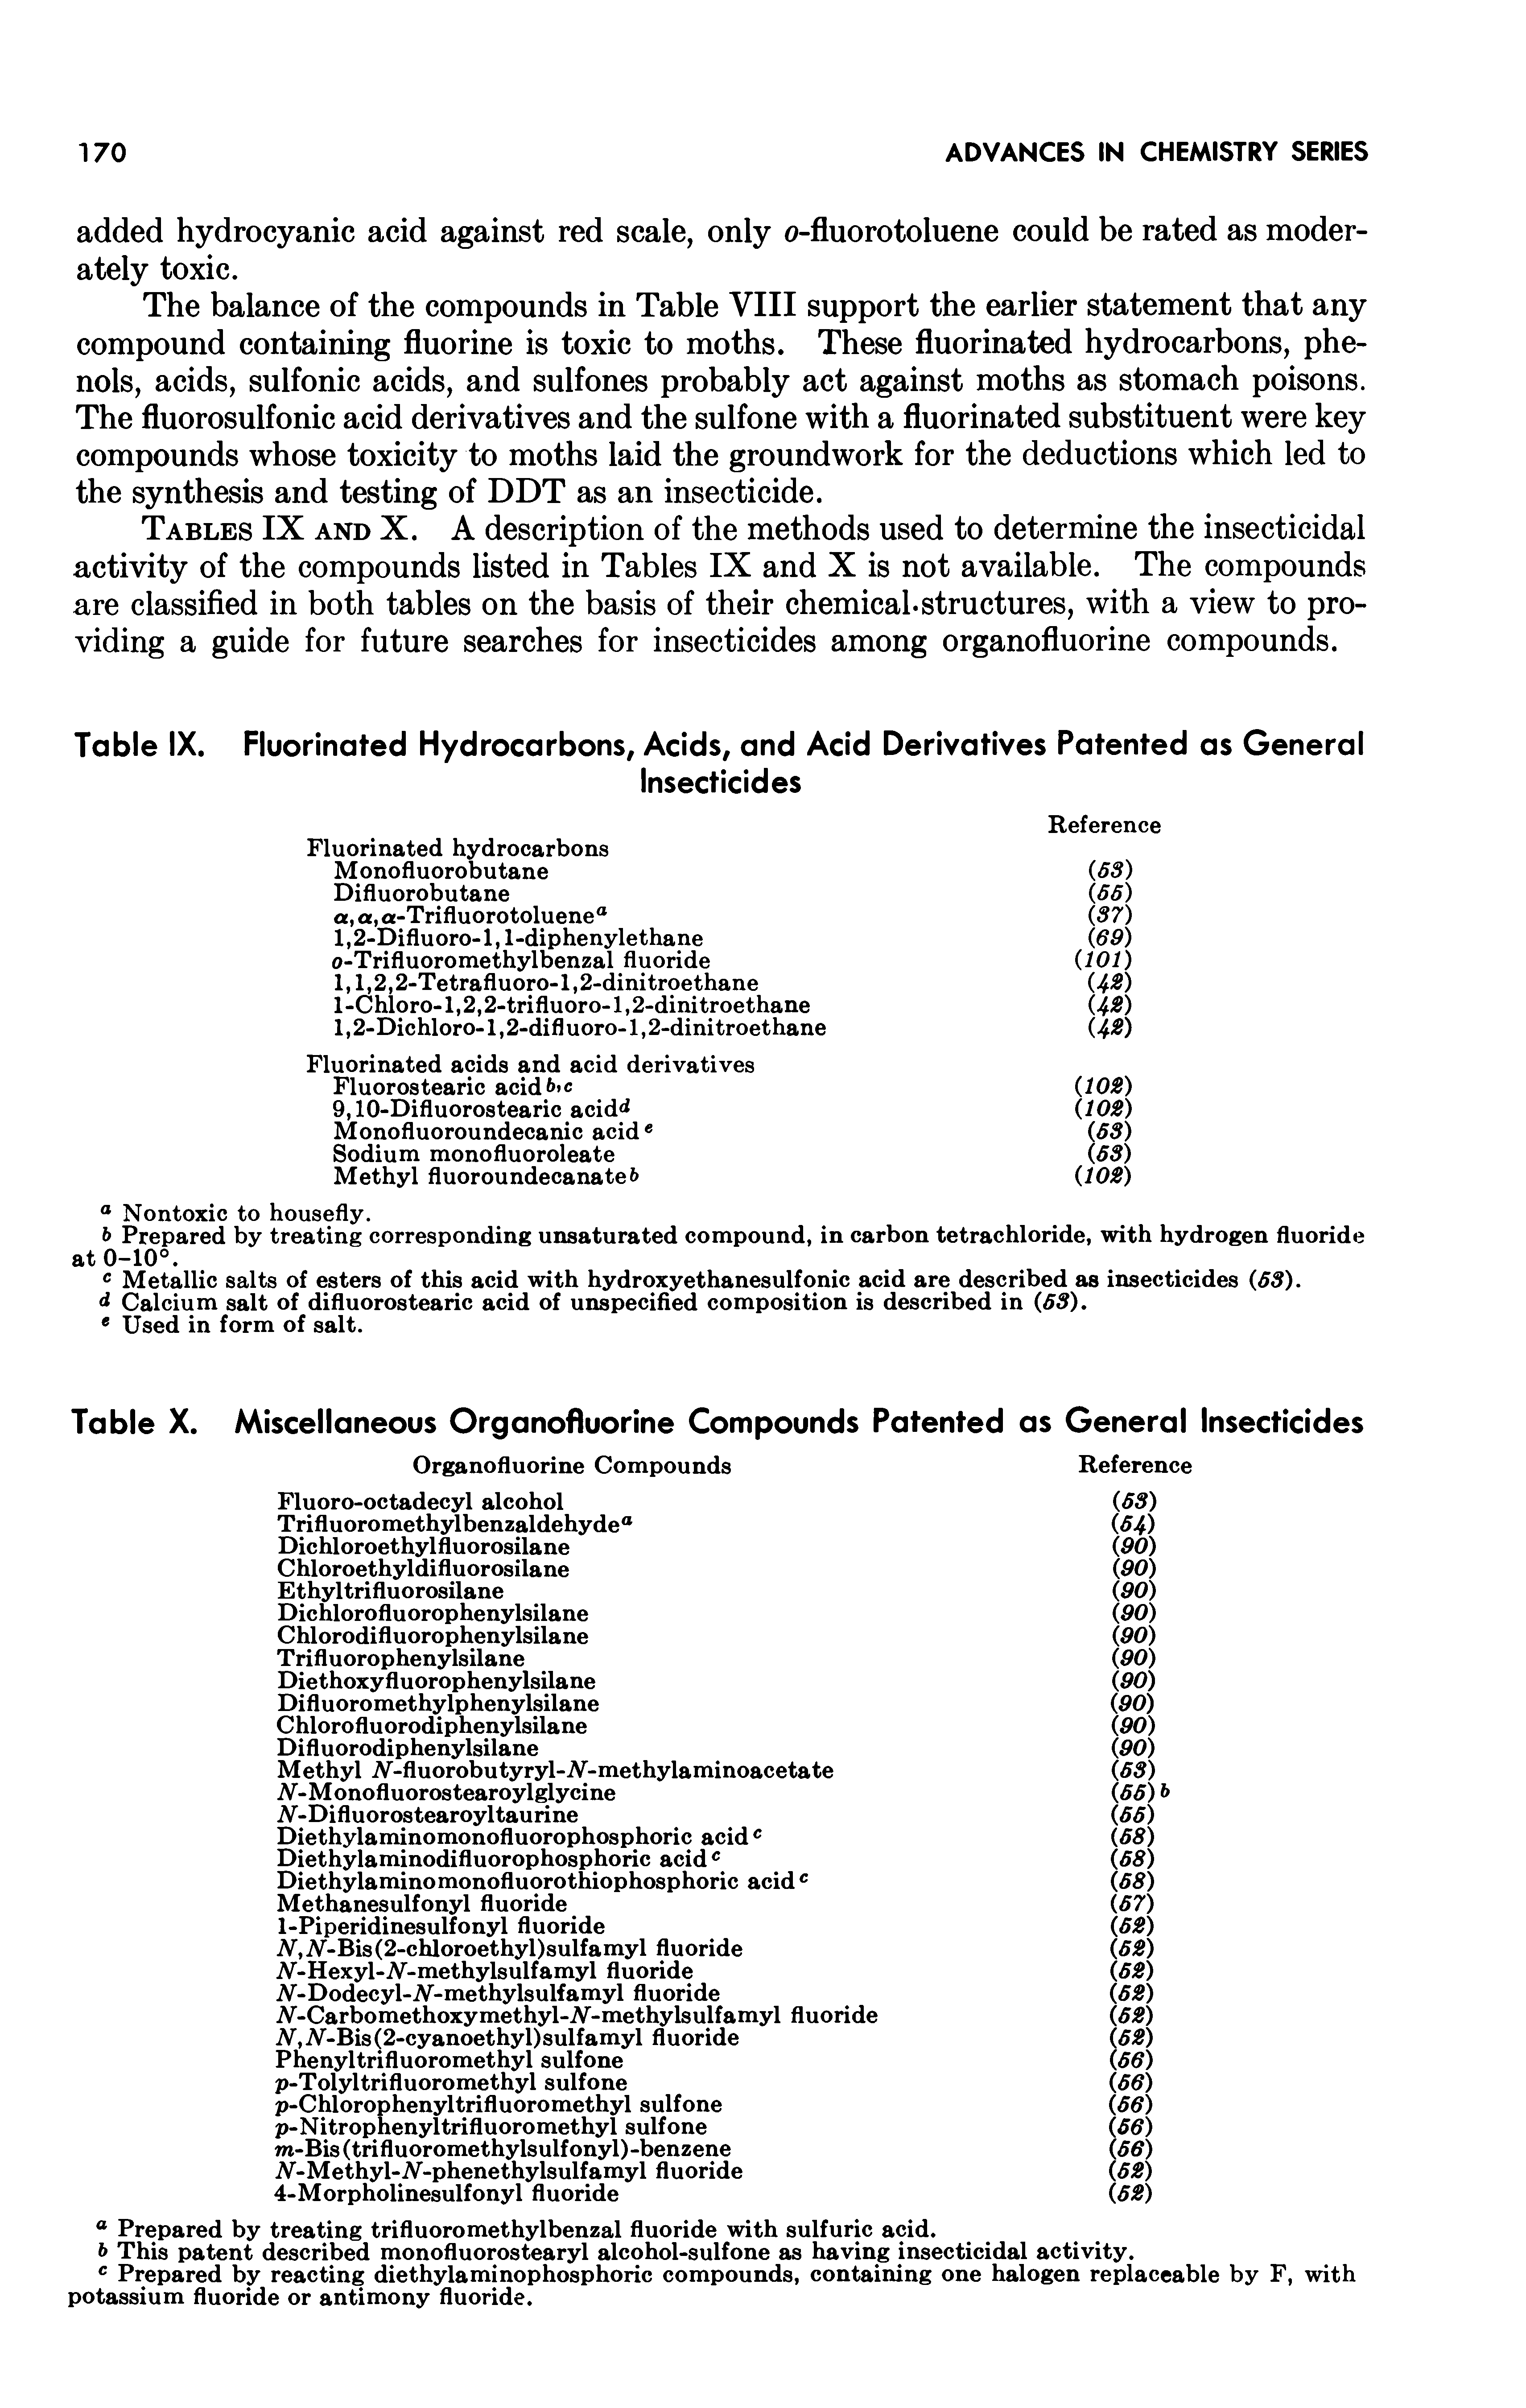 Tables IX and X. A description of the methods used to determine the insecticidal activity of the compounds listed in Tables IX and X is not available. The compounds are classified in both tables on the basis of their chemical-structures, with a view to providing a guide for future searches for insecticides among organofluorine compounds.